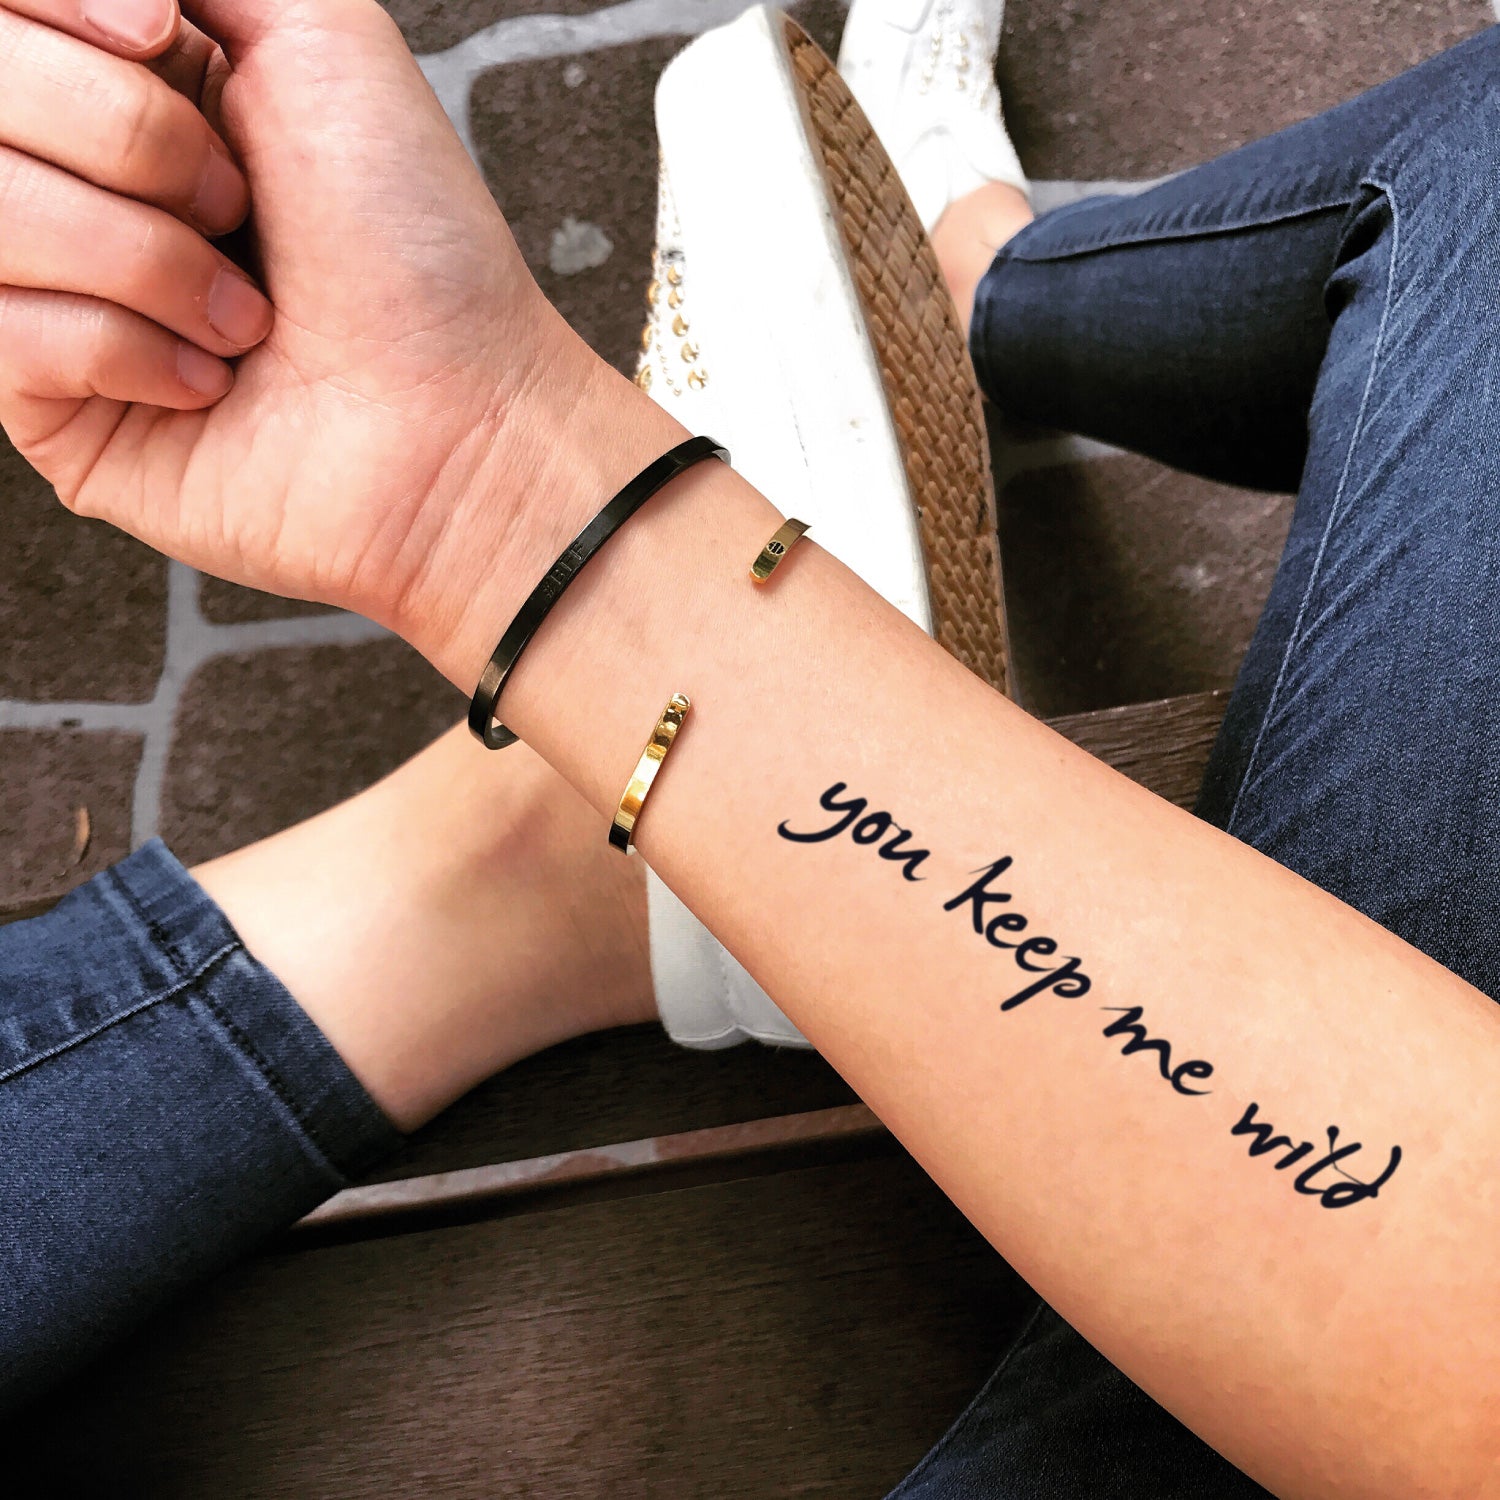 fake medium sister quotes you keep me wild lettering temporary tattoo sticker design idea on forearm